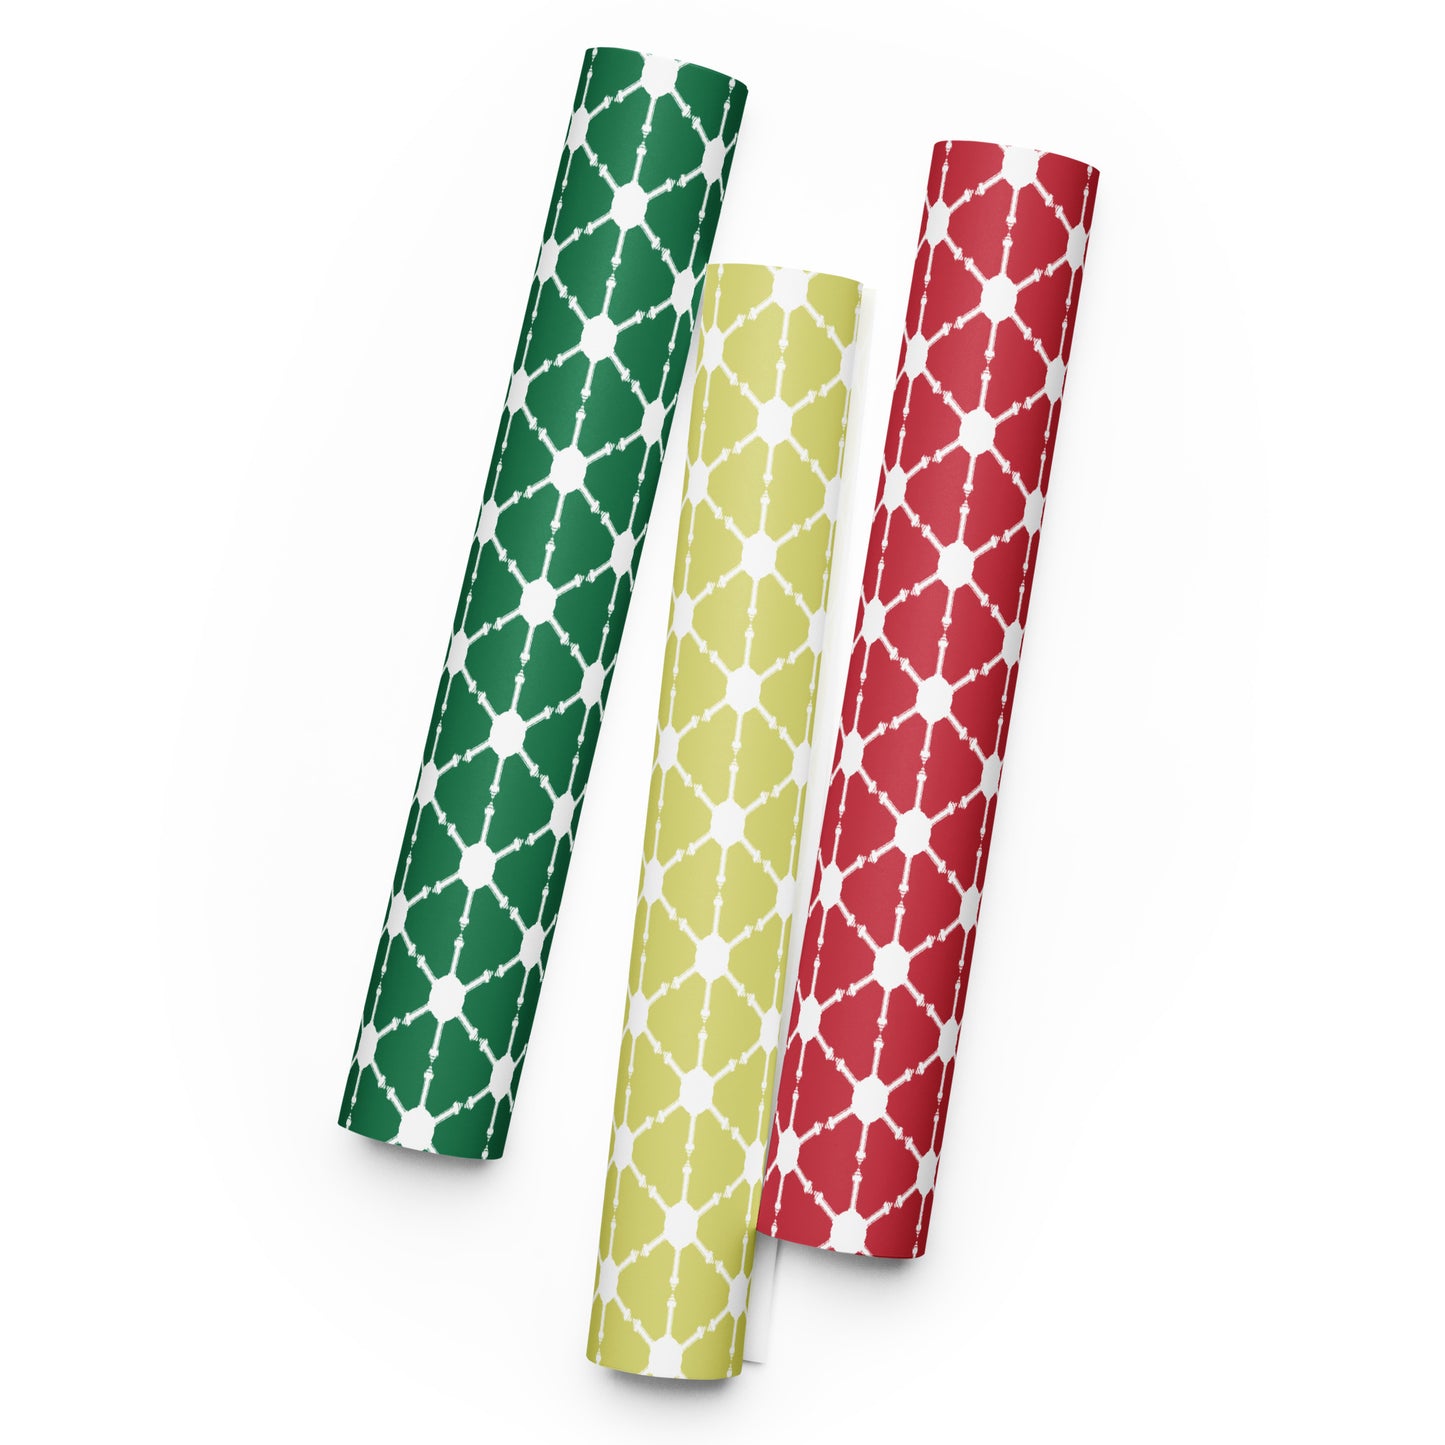 Bicentennial Tower Snowflake Wrapping Paper Sheets